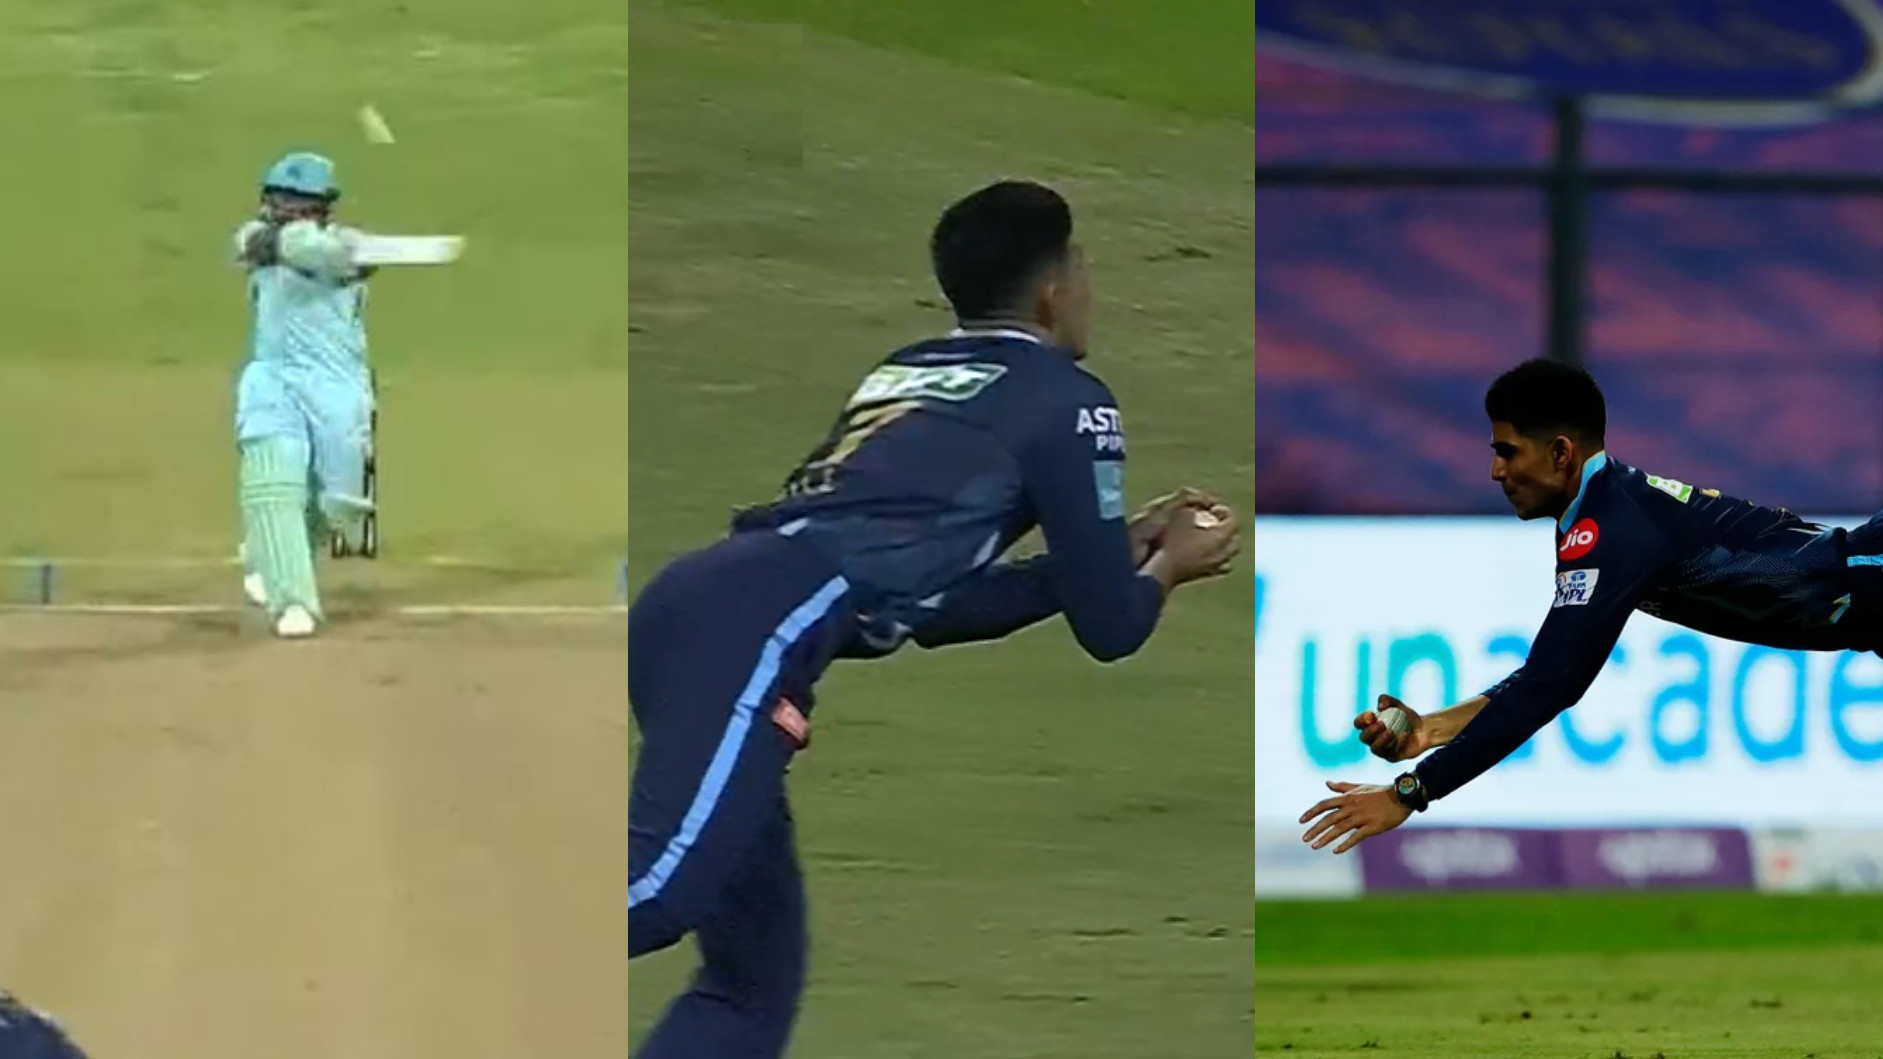 IPL 2022: WATCH- GT's Shubman Gill takes an amazing catch running backwards to send back LSG's Evin Lewis